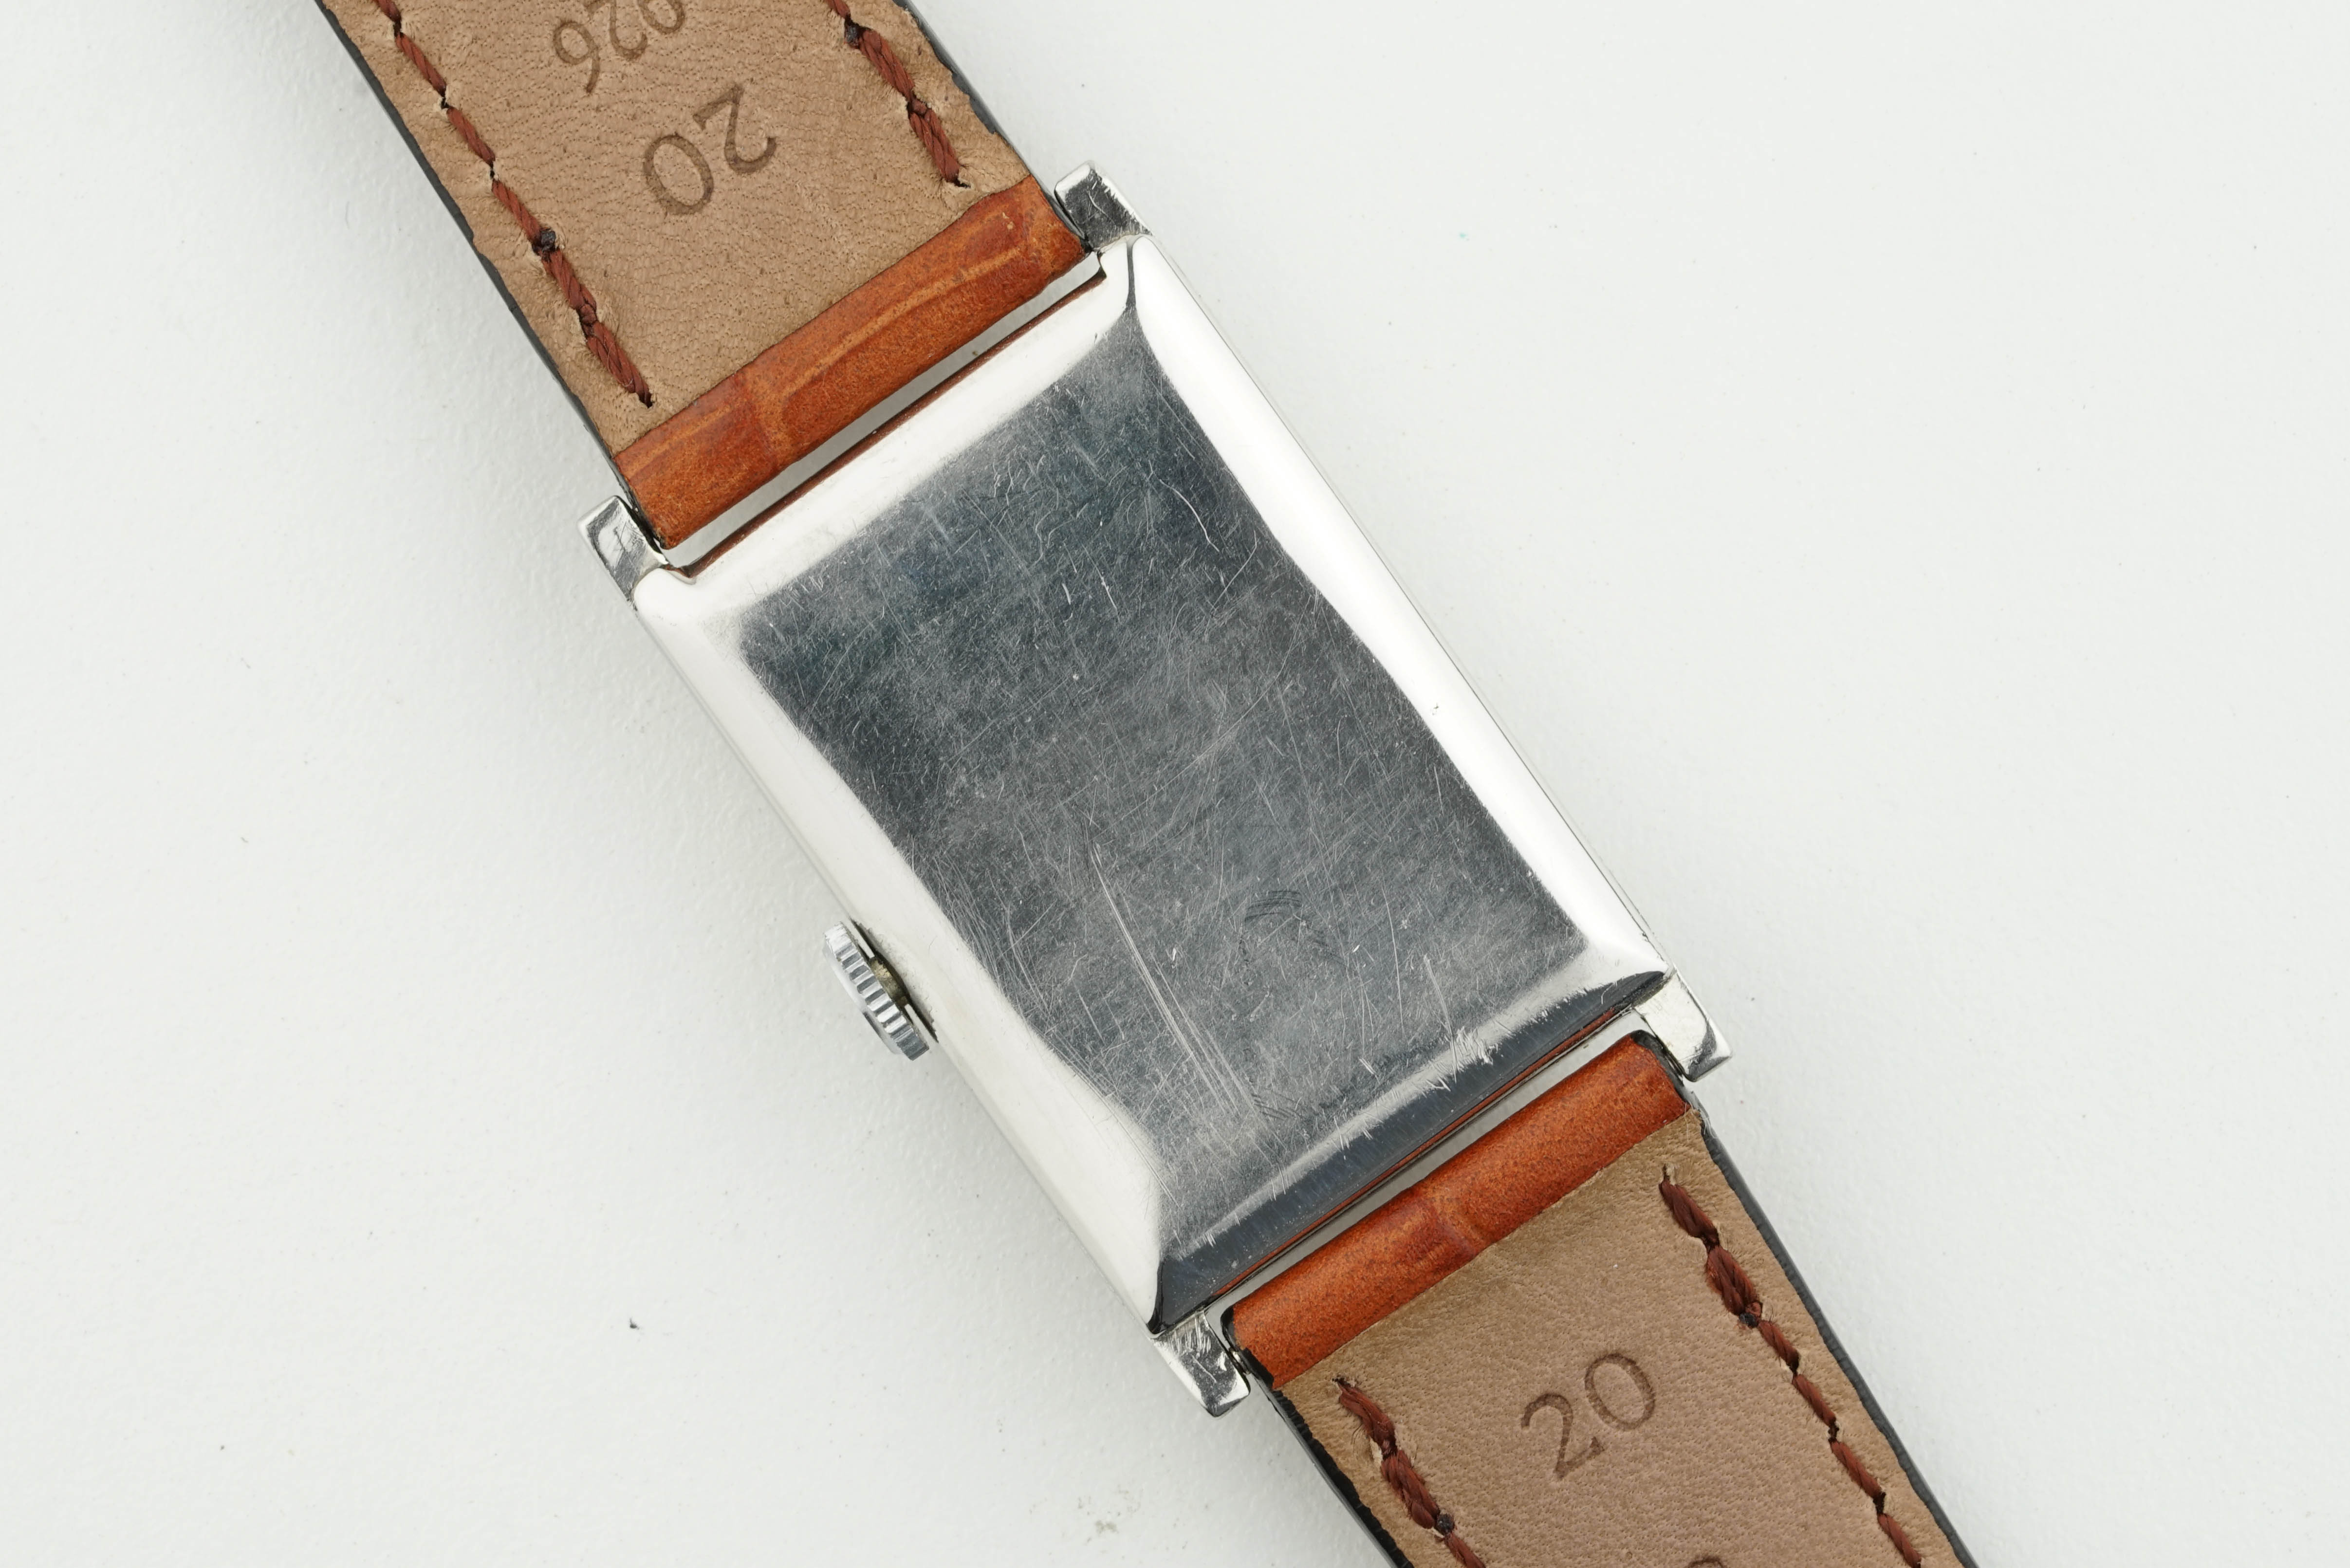 OMEGA OVERSIZE TANK STYLE WRISTWATCH, rectnagular silver dial with arabic numeral hour markers and - Image 2 of 2